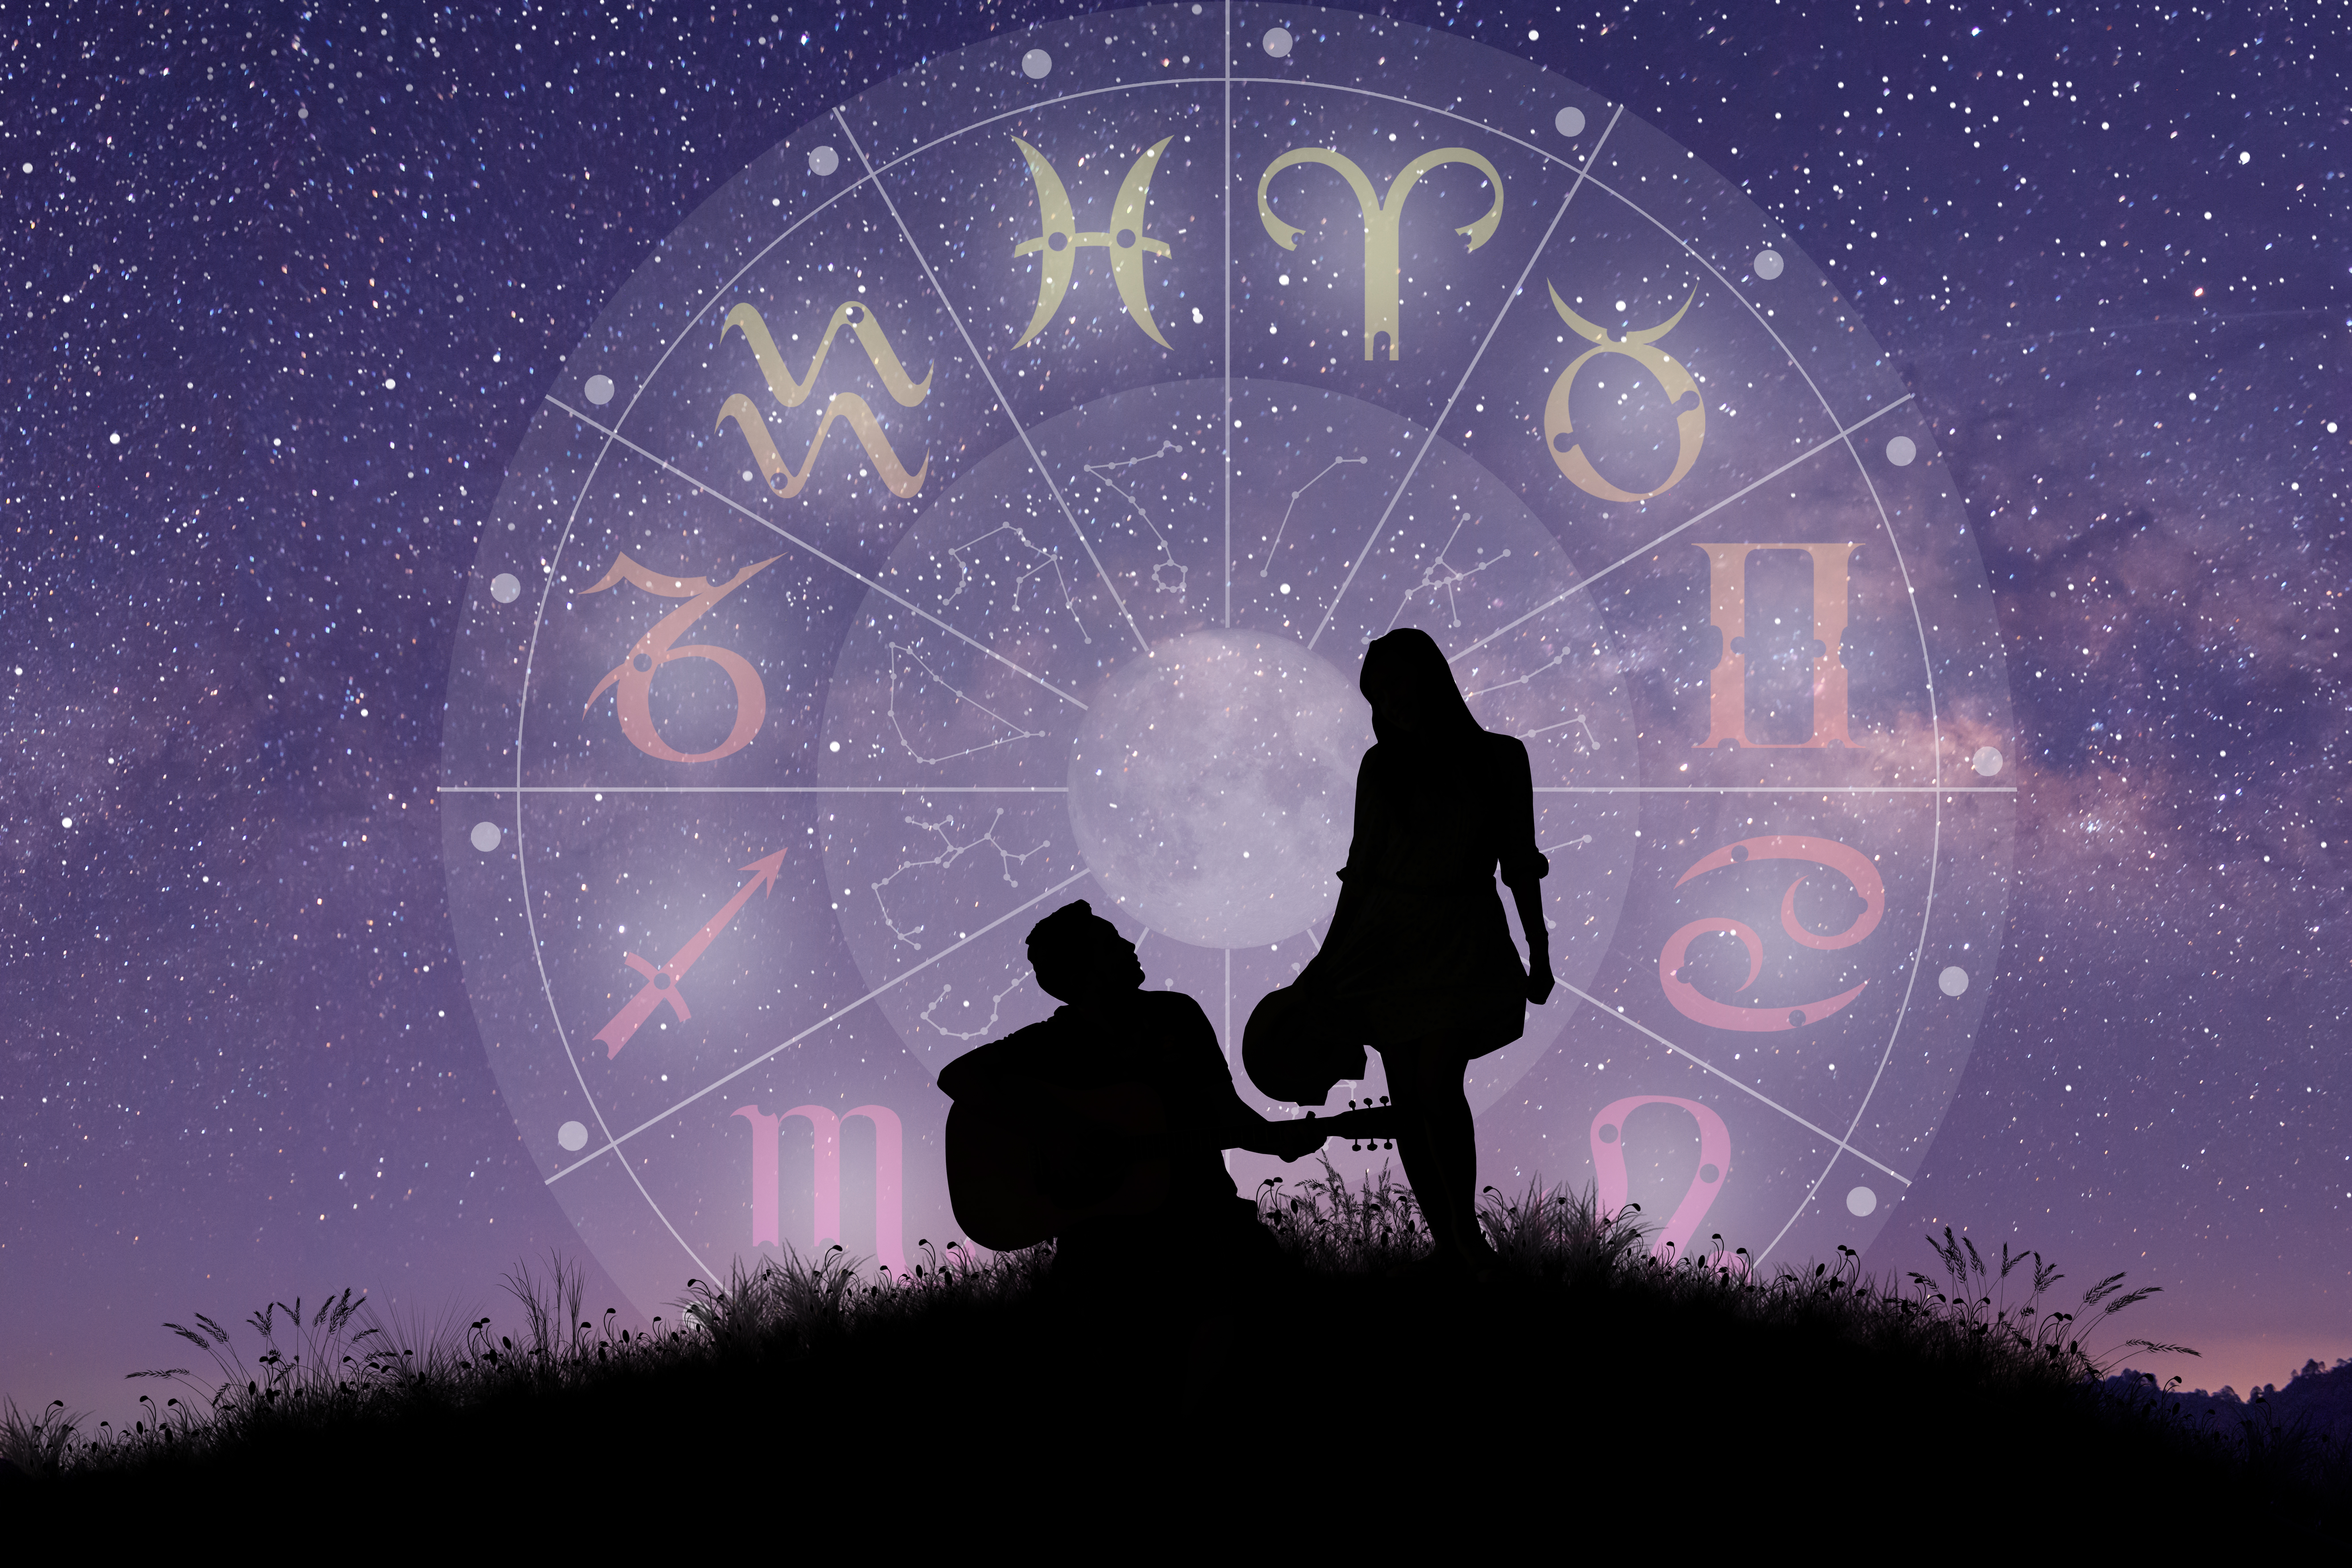 A couple singing and dancing over the zodiac wheel. | Source: Shutterstock